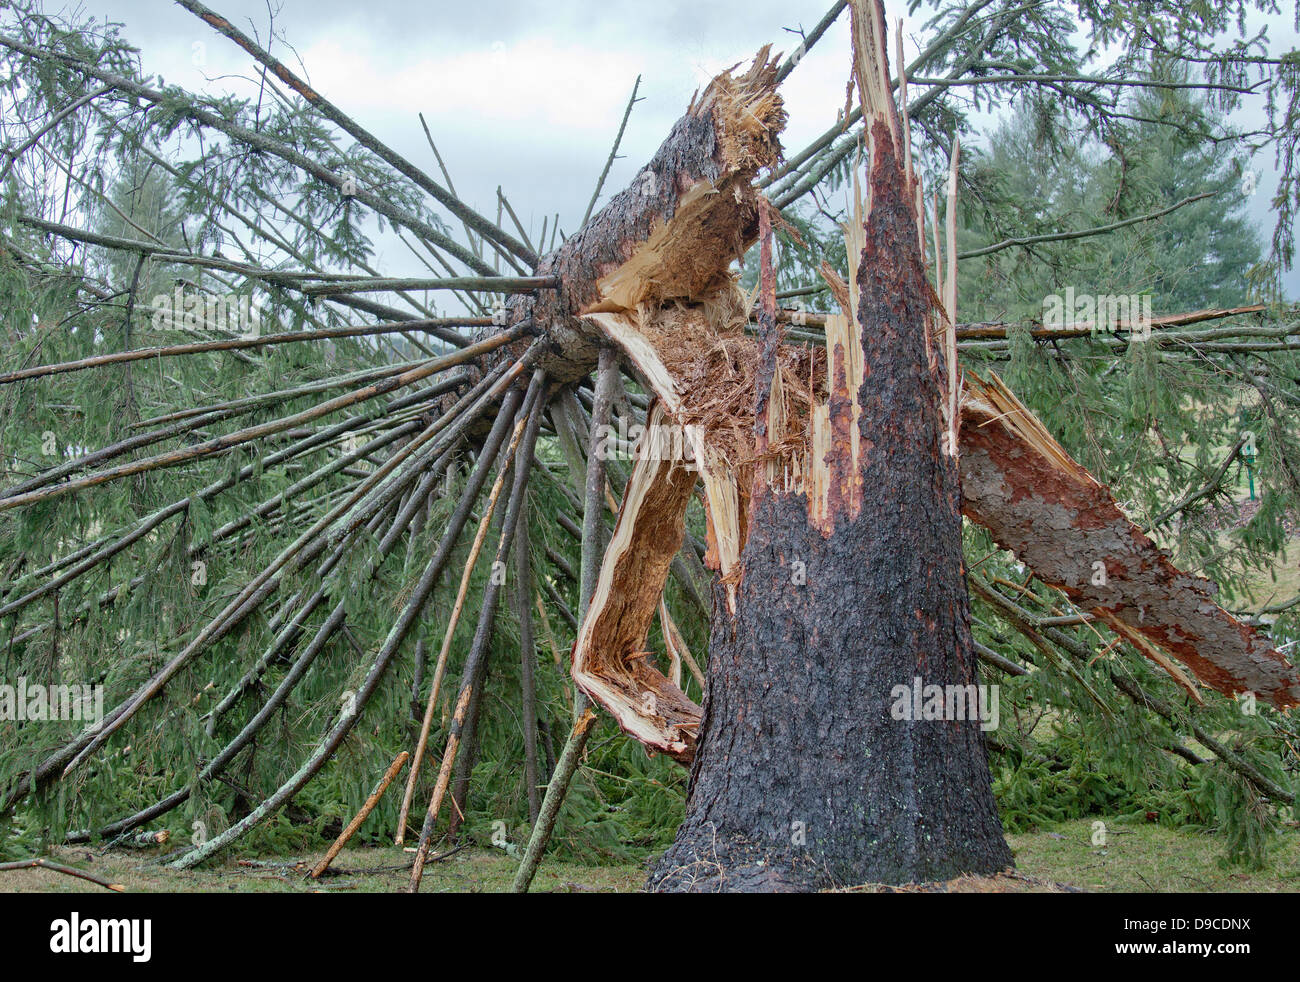 A live evergreen tree snapped in half by a wind storm Stock Photo